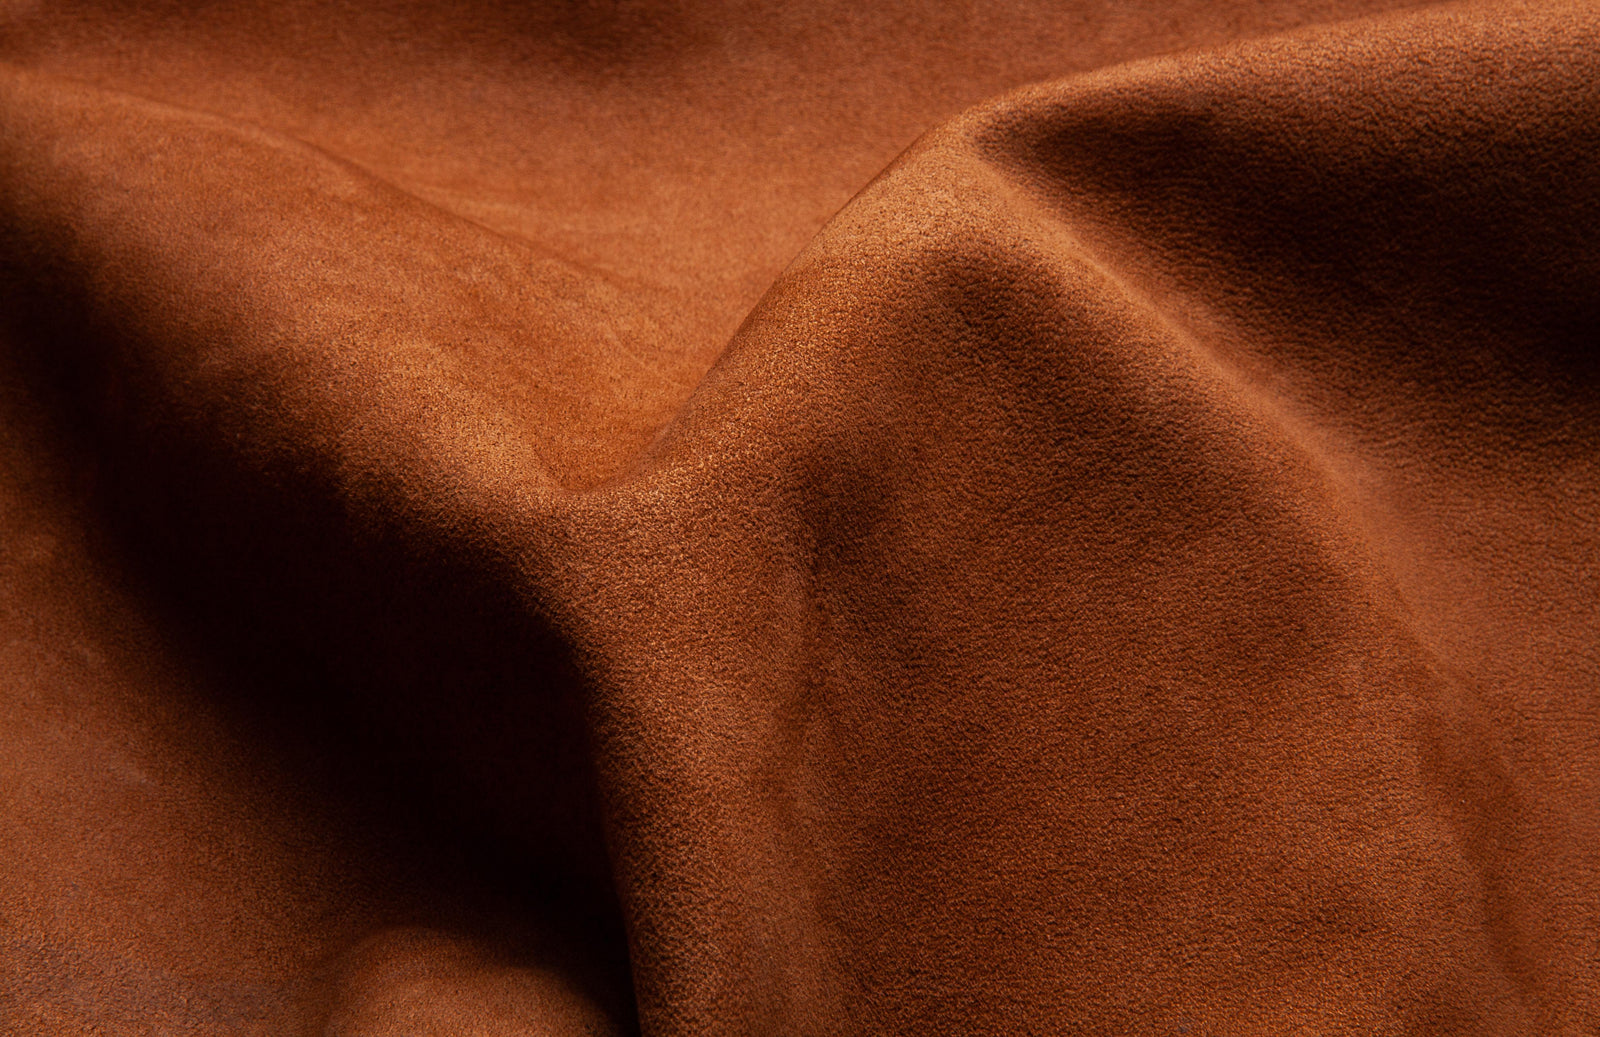 Suede leather. Genuine leather material. Brown background. Beige